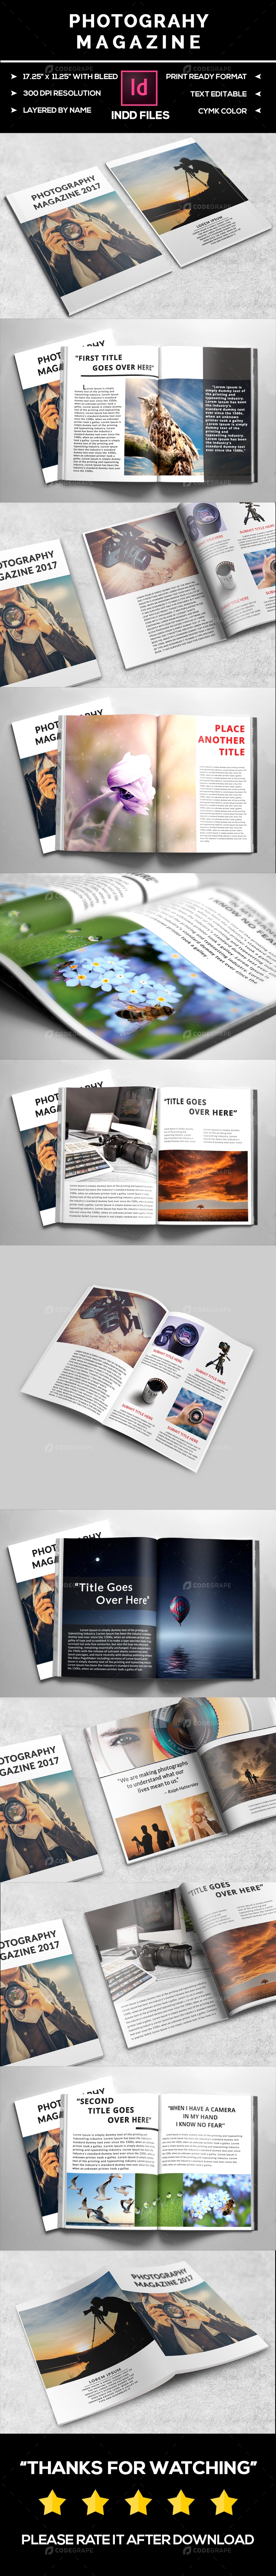 Photography Magazine - 16 Pages